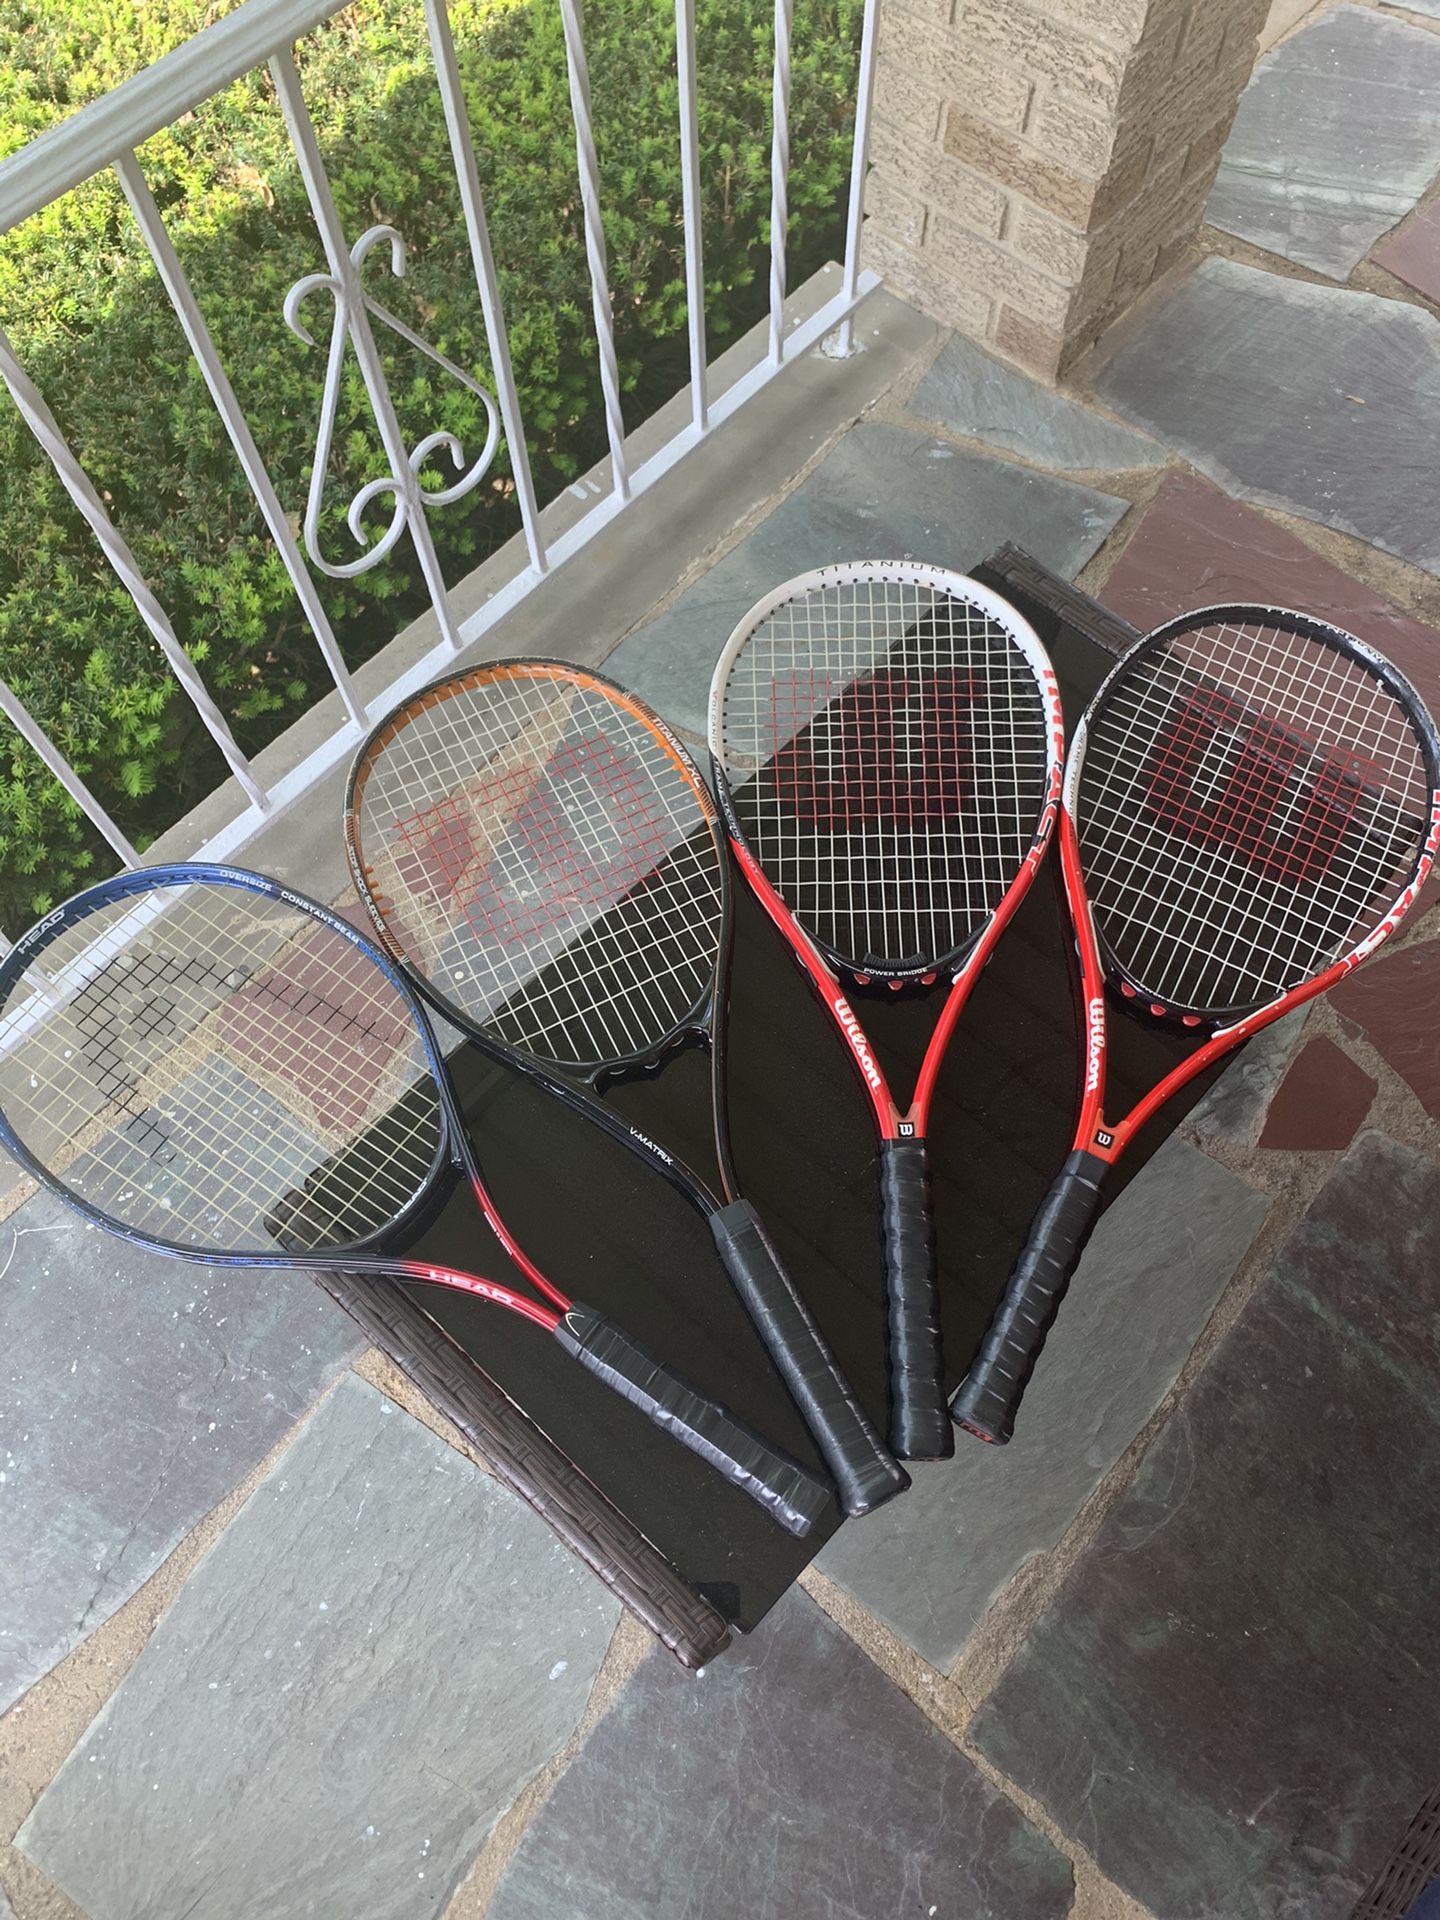 Tennis rackets $15 each or $50 for 4